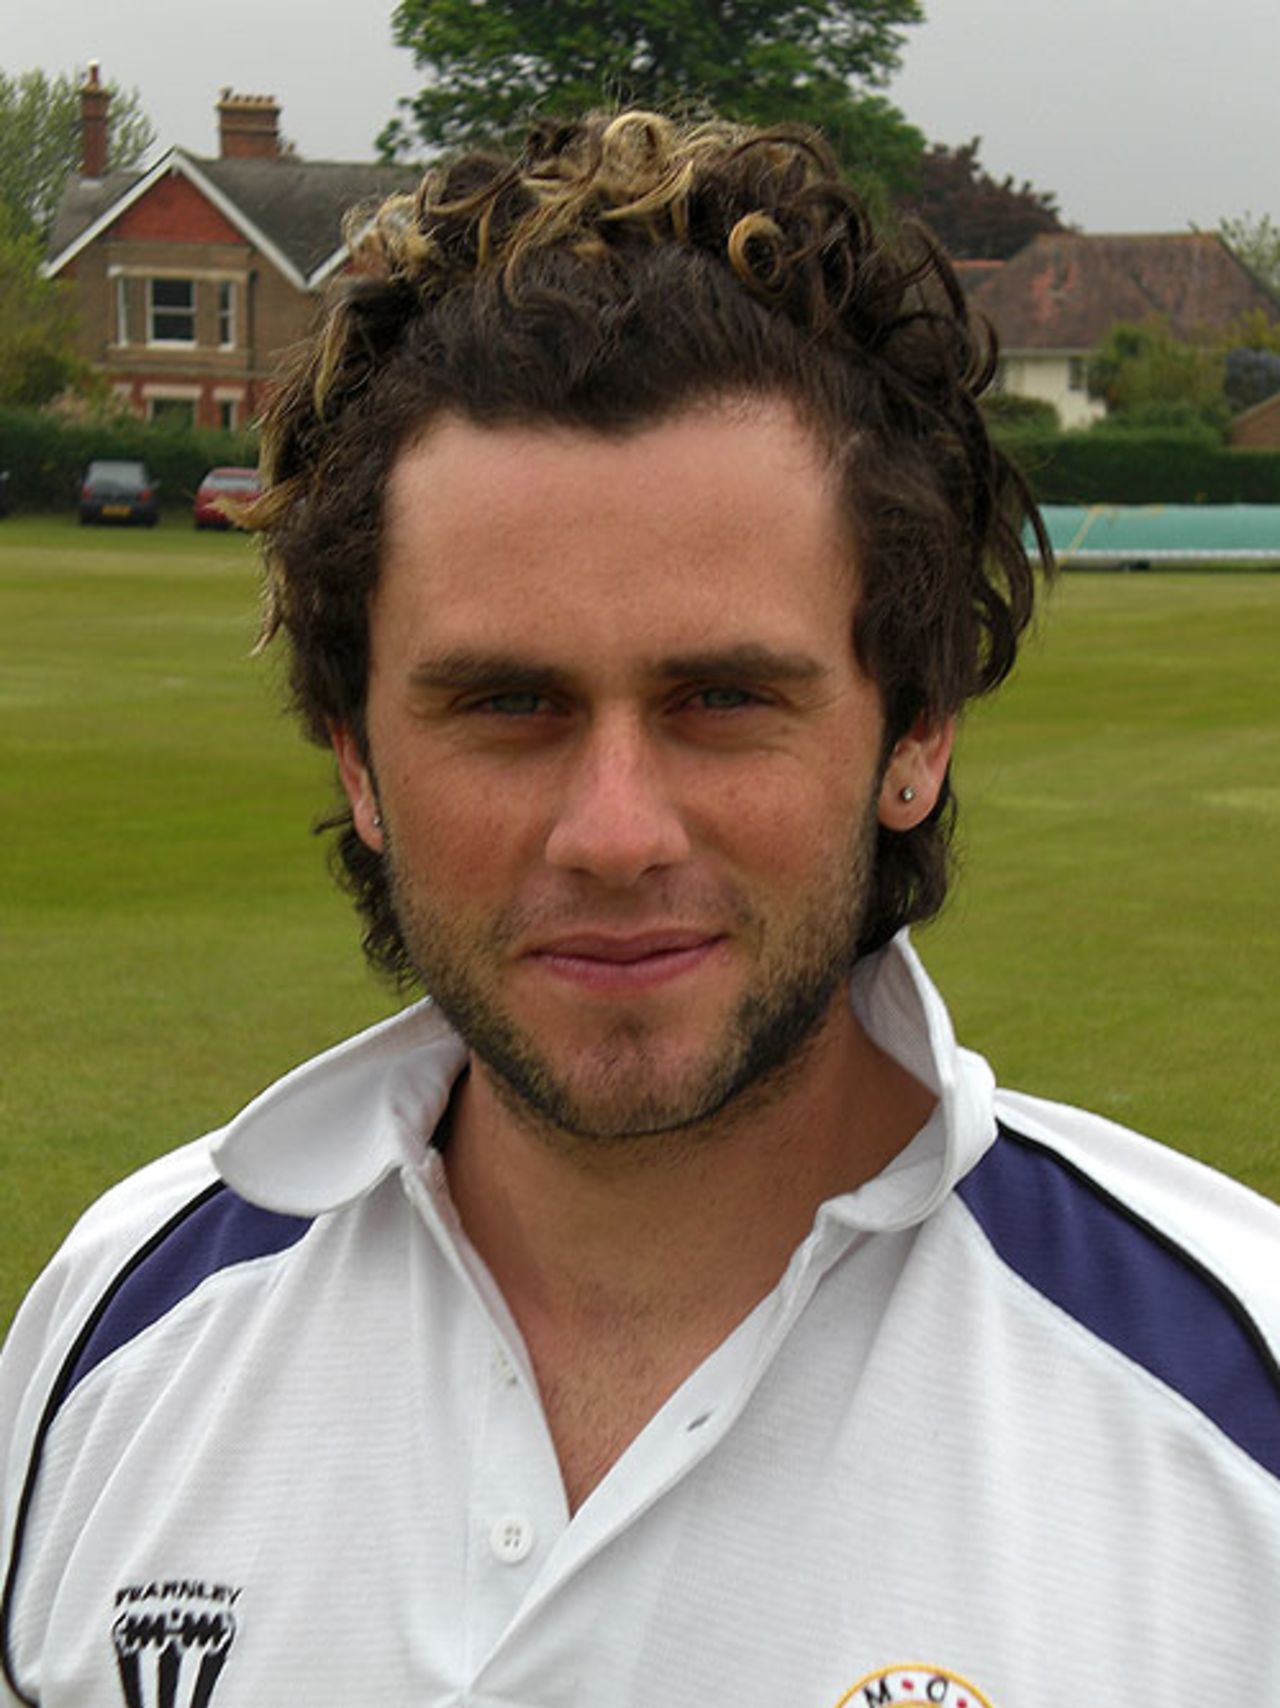 A portrait of the Loughborough cricketer, Jonathan Hughes, May 2008